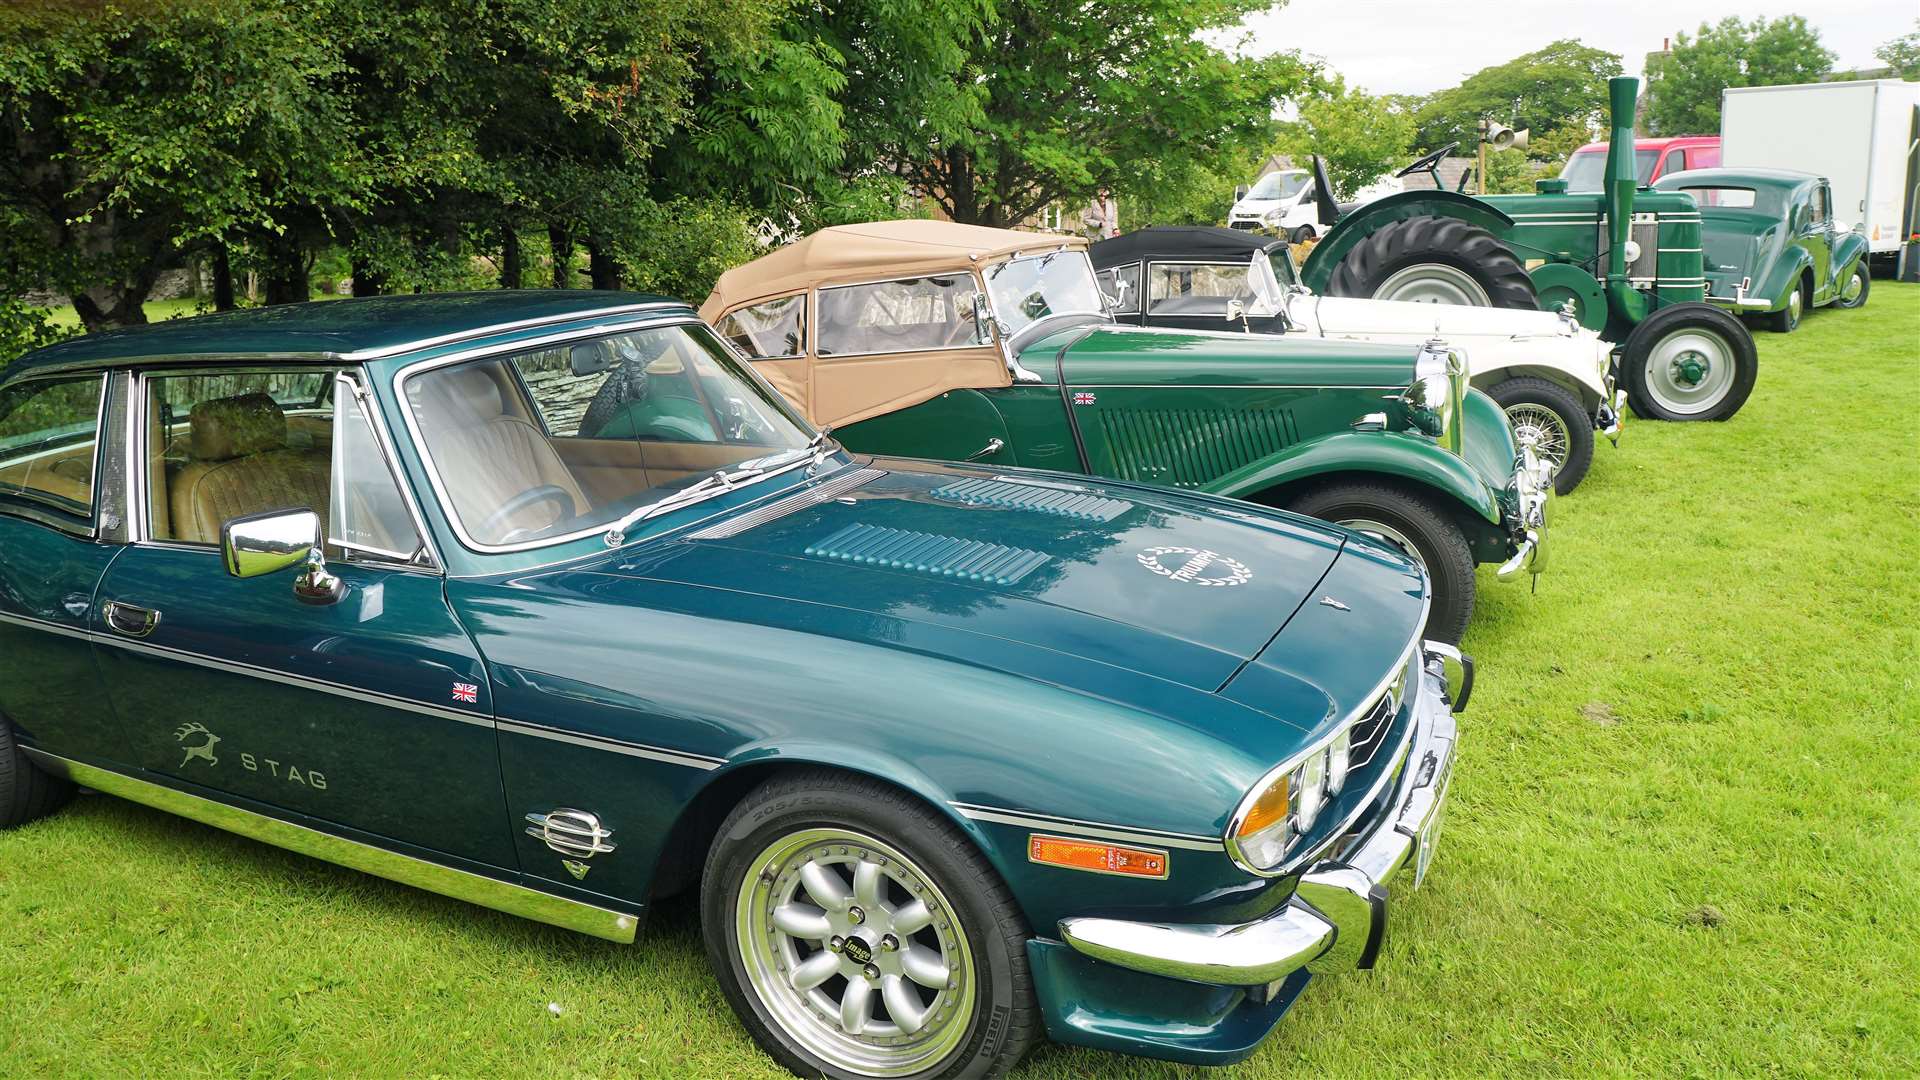 A few of the classic cars on show at the event. Picture: DGS